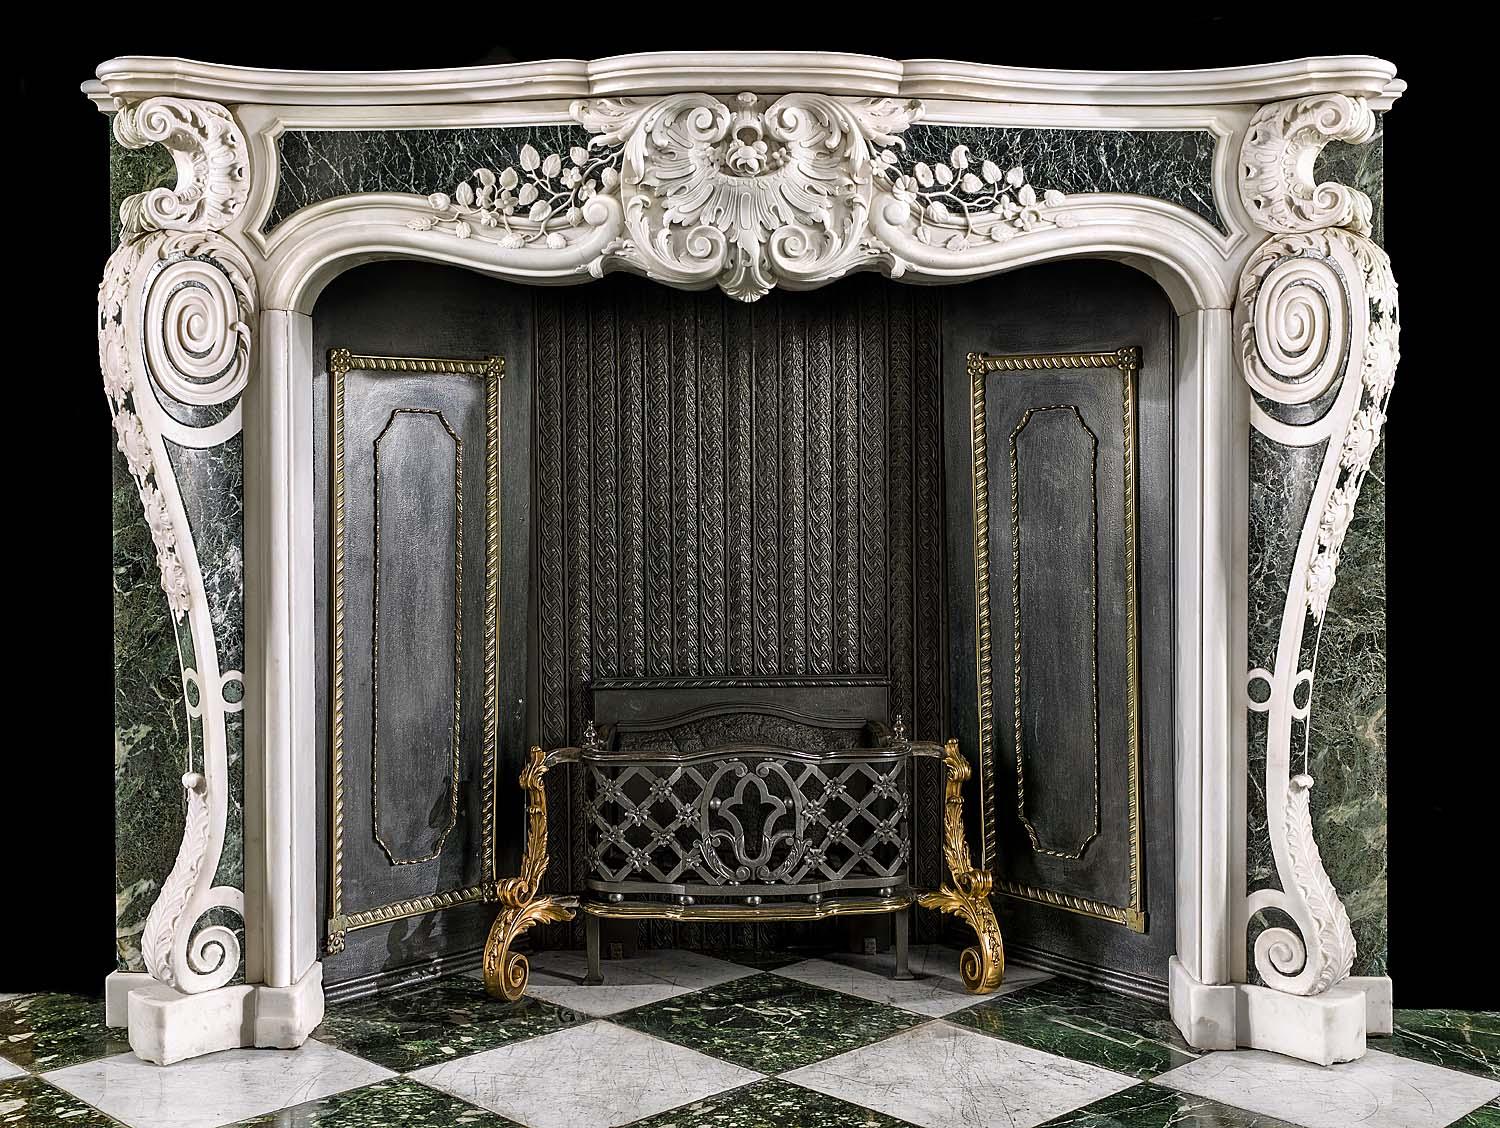 George II Rococo Chimneypiece in White Statuary and Verde Antico Marble For Sale 3